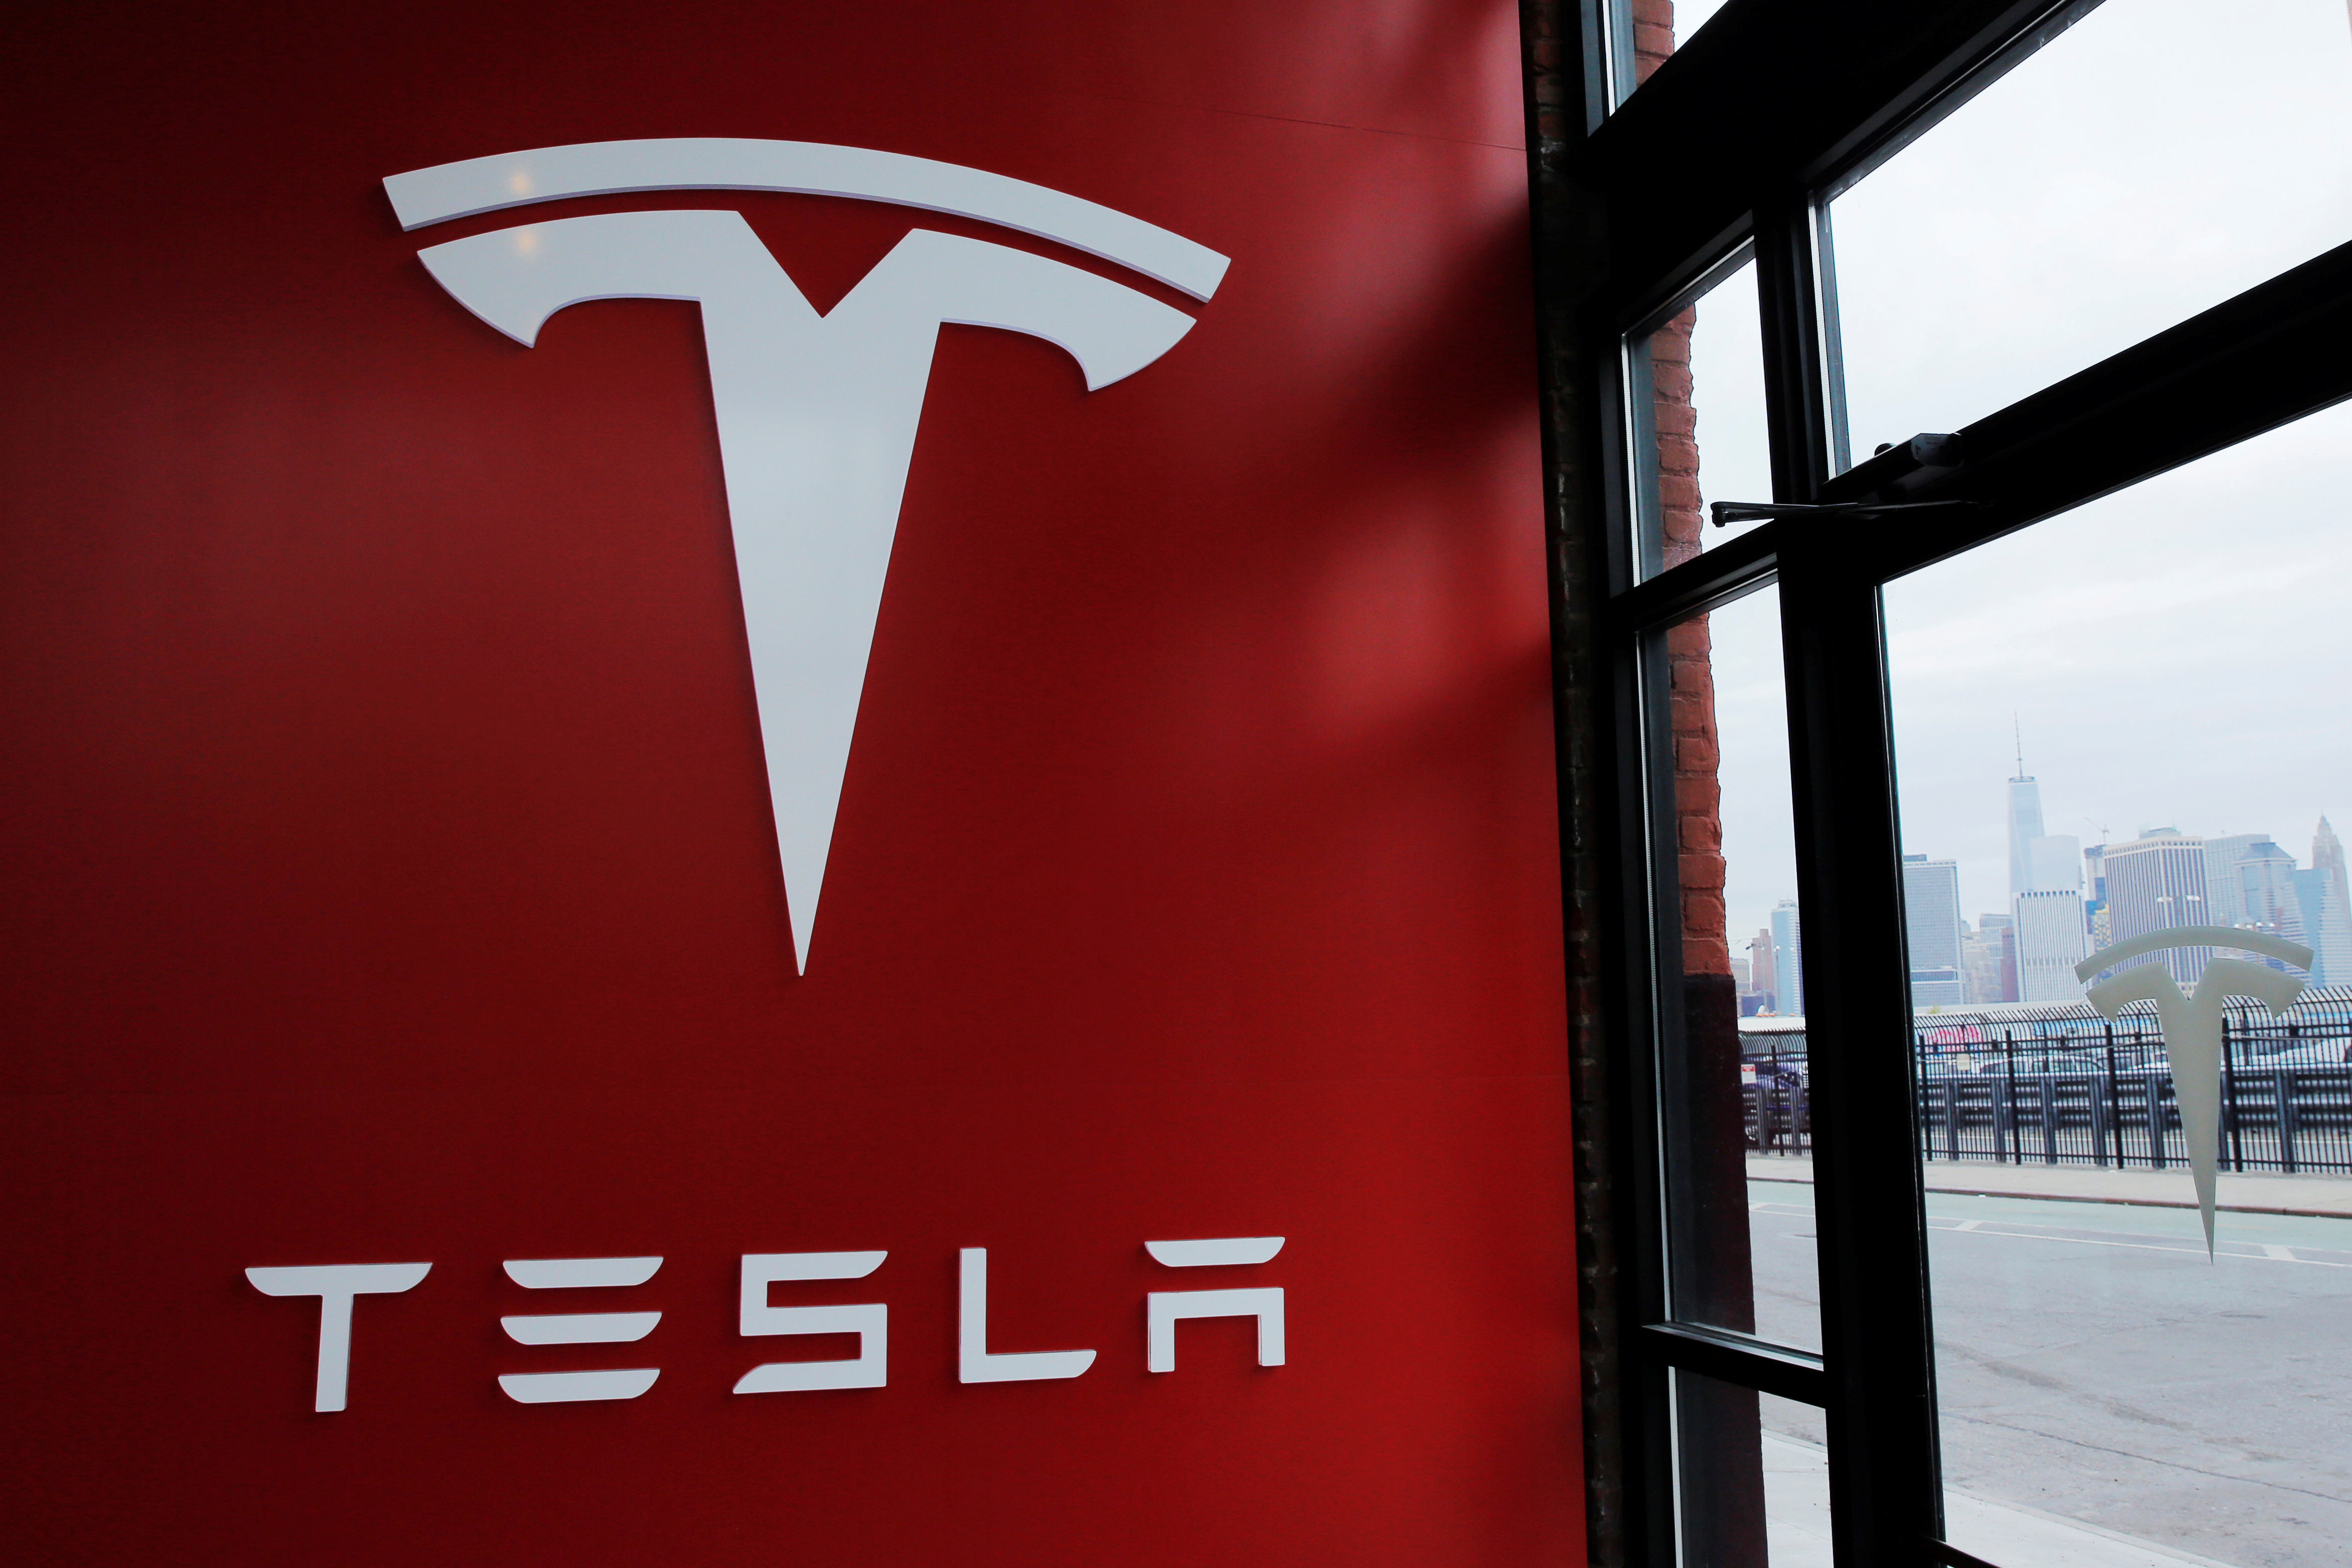 A Tesla logo is painted on a wall inside of a Tesla dealership in New York